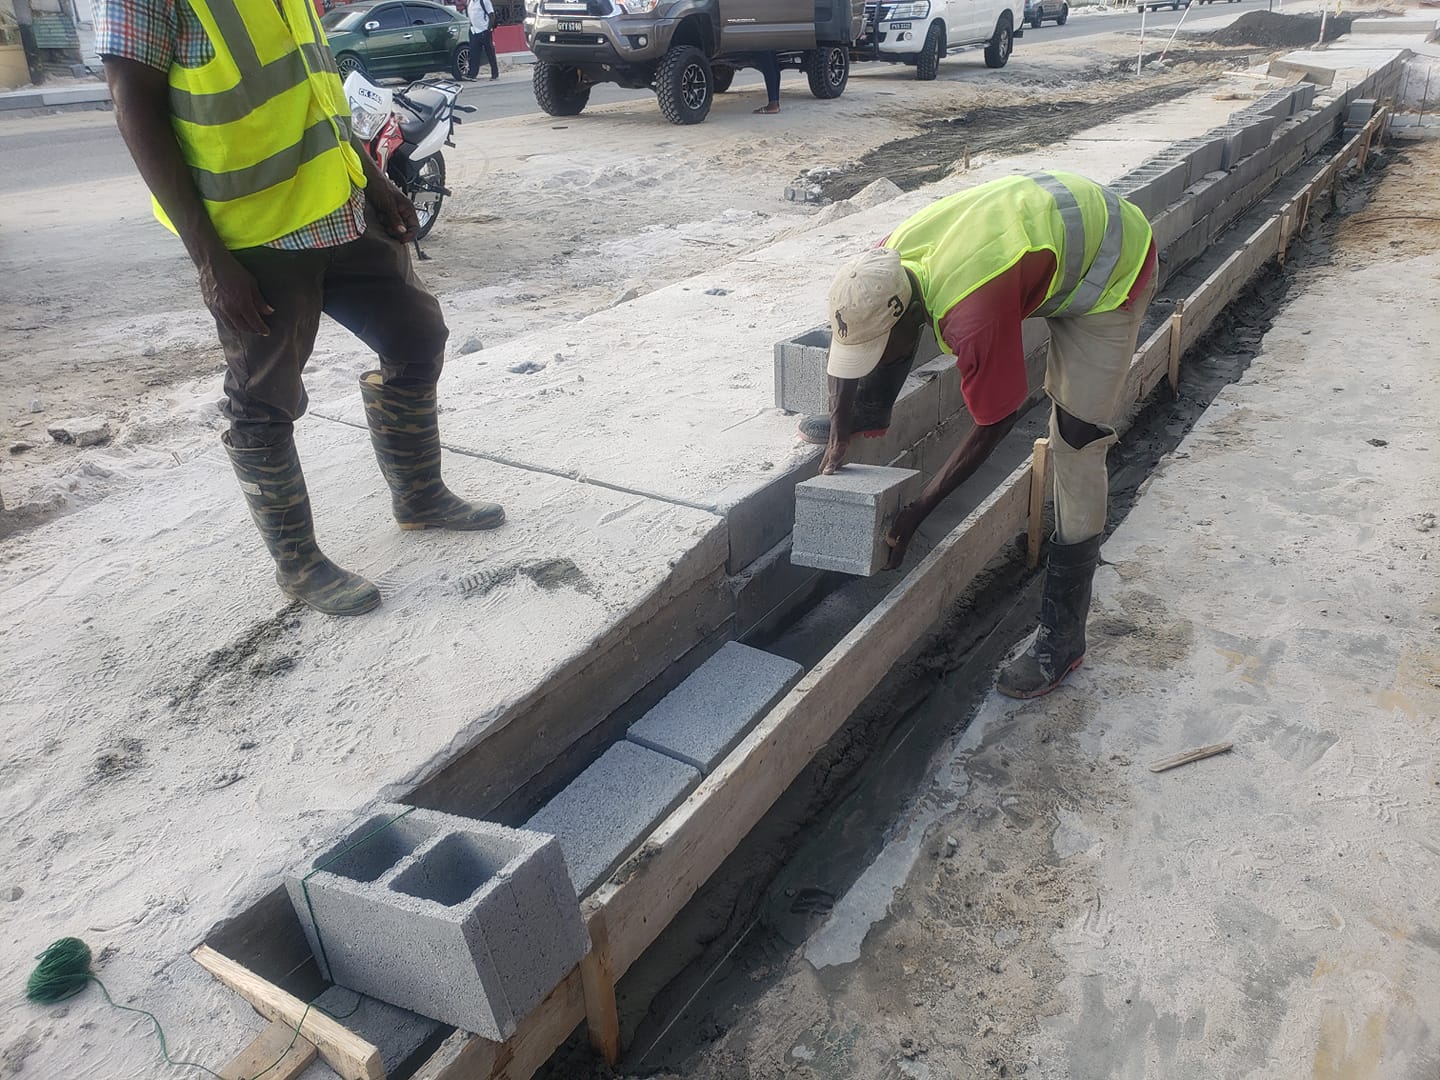 RockSolid Stone Hollow Blocks being used to build drains